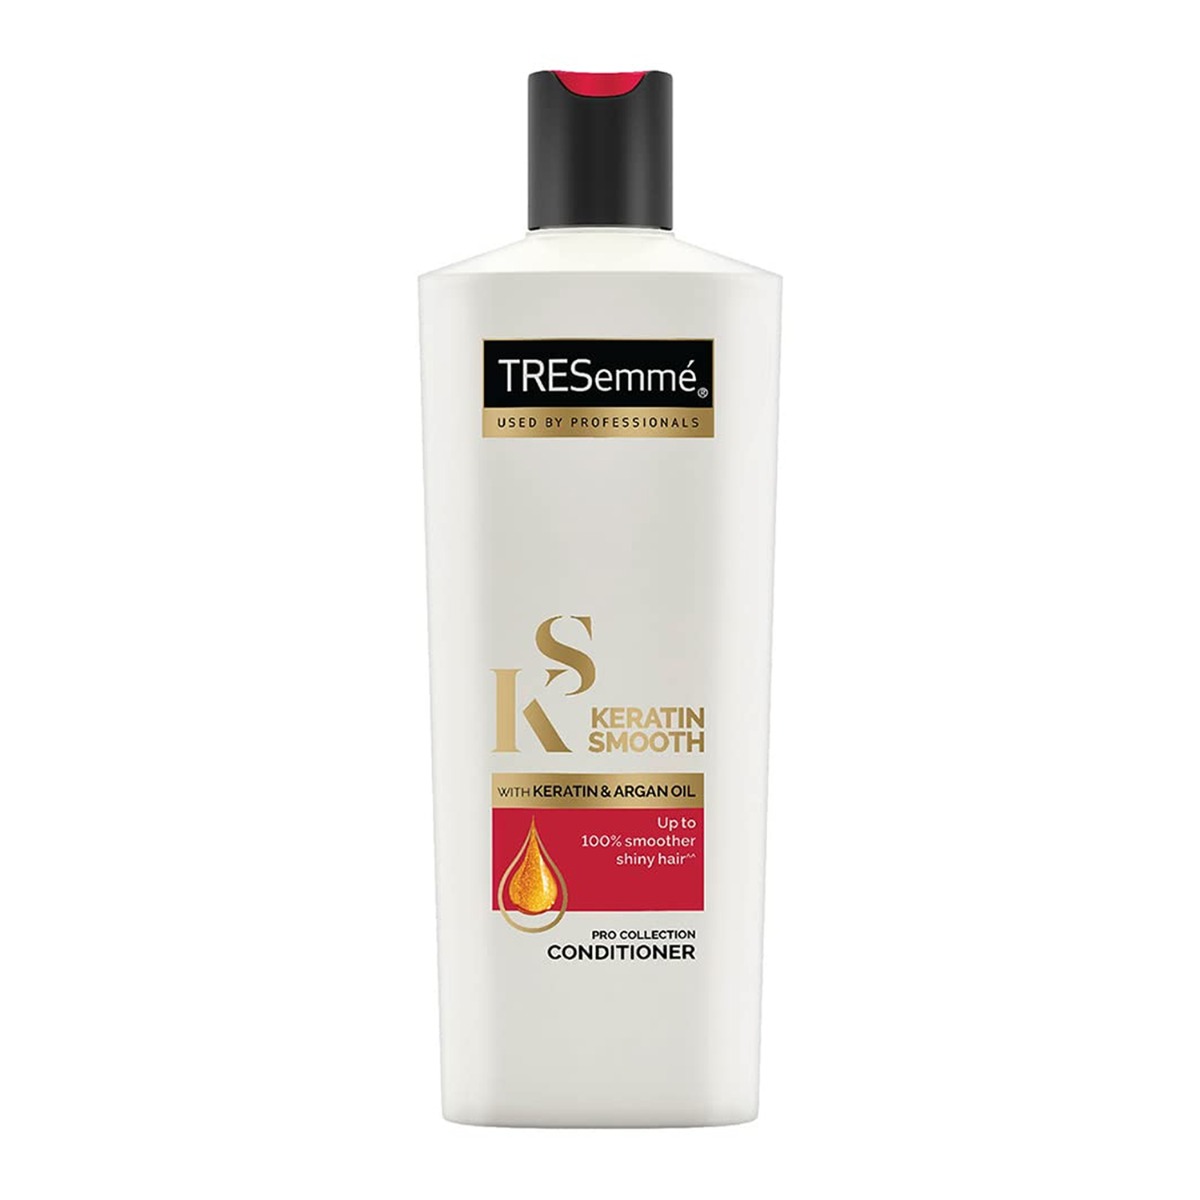 TRESemme Pro Collection Keratin Smooth Conditioner with Keratin & Argan Oil, 190ml